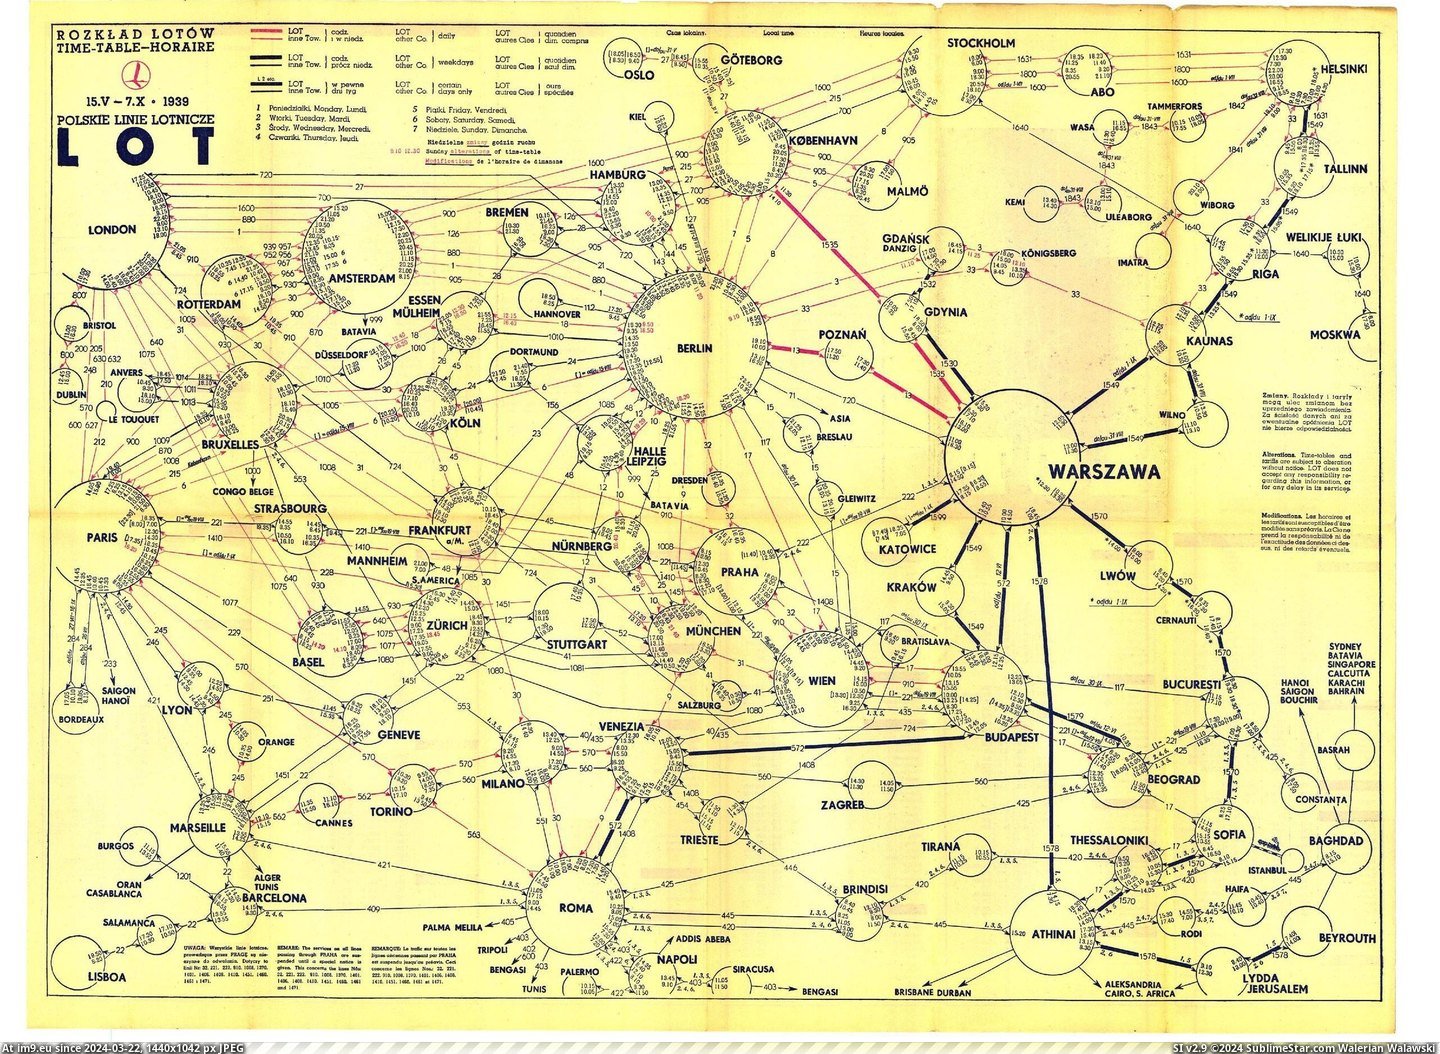 #World #Map #Months #Routes #Airlines #Lot #Polish #War [Mapporn] Map of routes of LOT Polish Airlines in last months before World War II [3662x2667] Pic. (Image of album My r/MAPS favs))